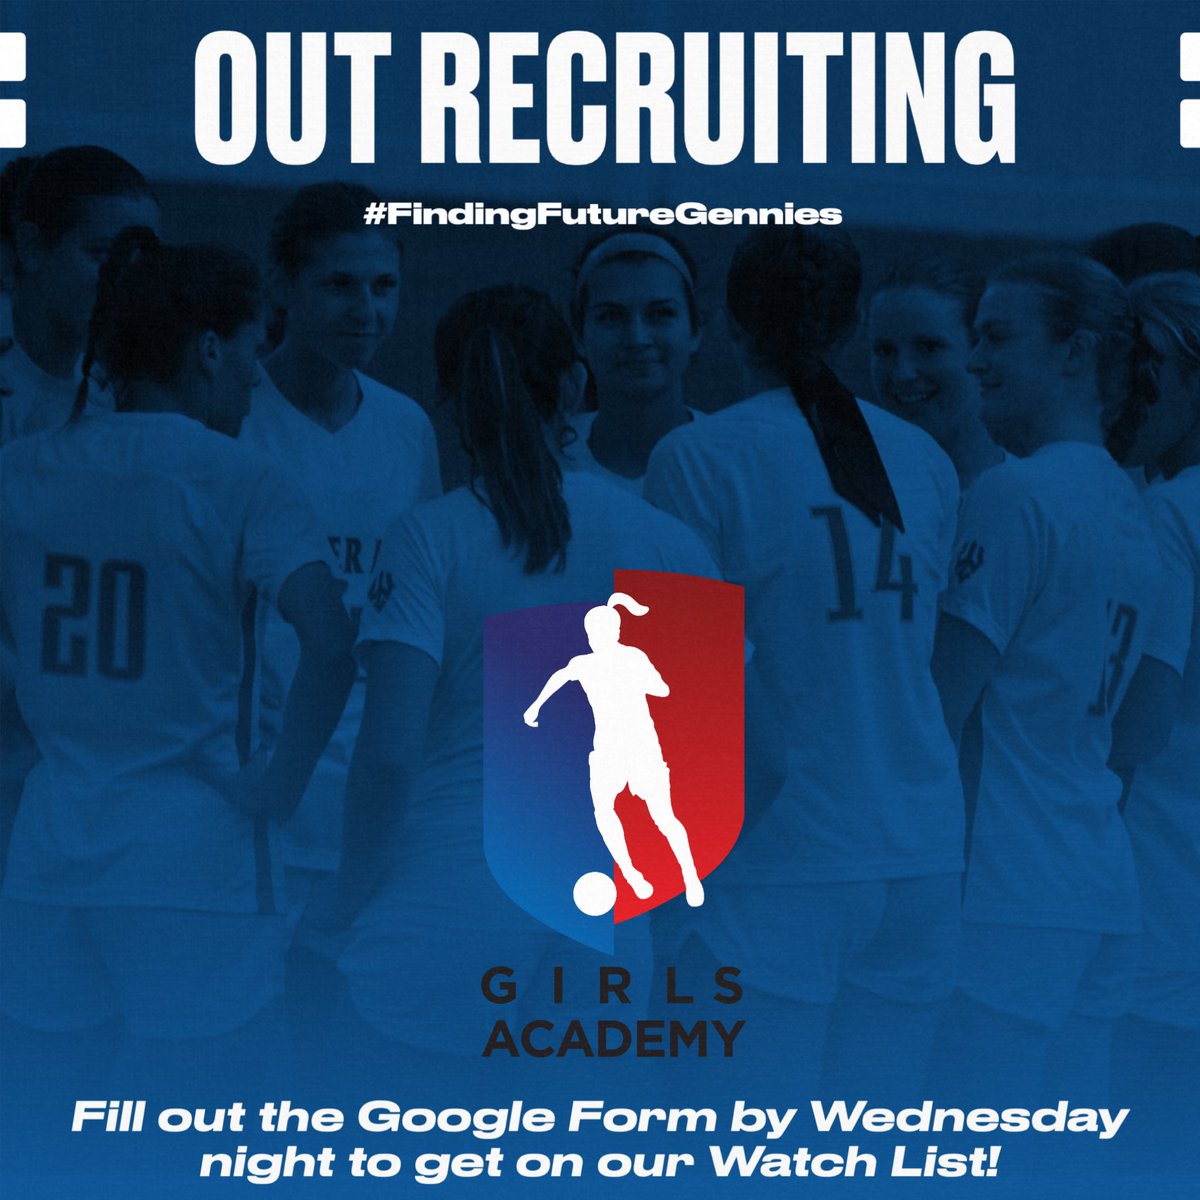 The Coaching Staff is hitting the road to go recruiting this weekend!

Use the link below to fill out the Google form to get in our Watch List for this event! #ForTheBoo 

⬇️⬇️⬇️

forms.gle/64RBtZPysgYxky…